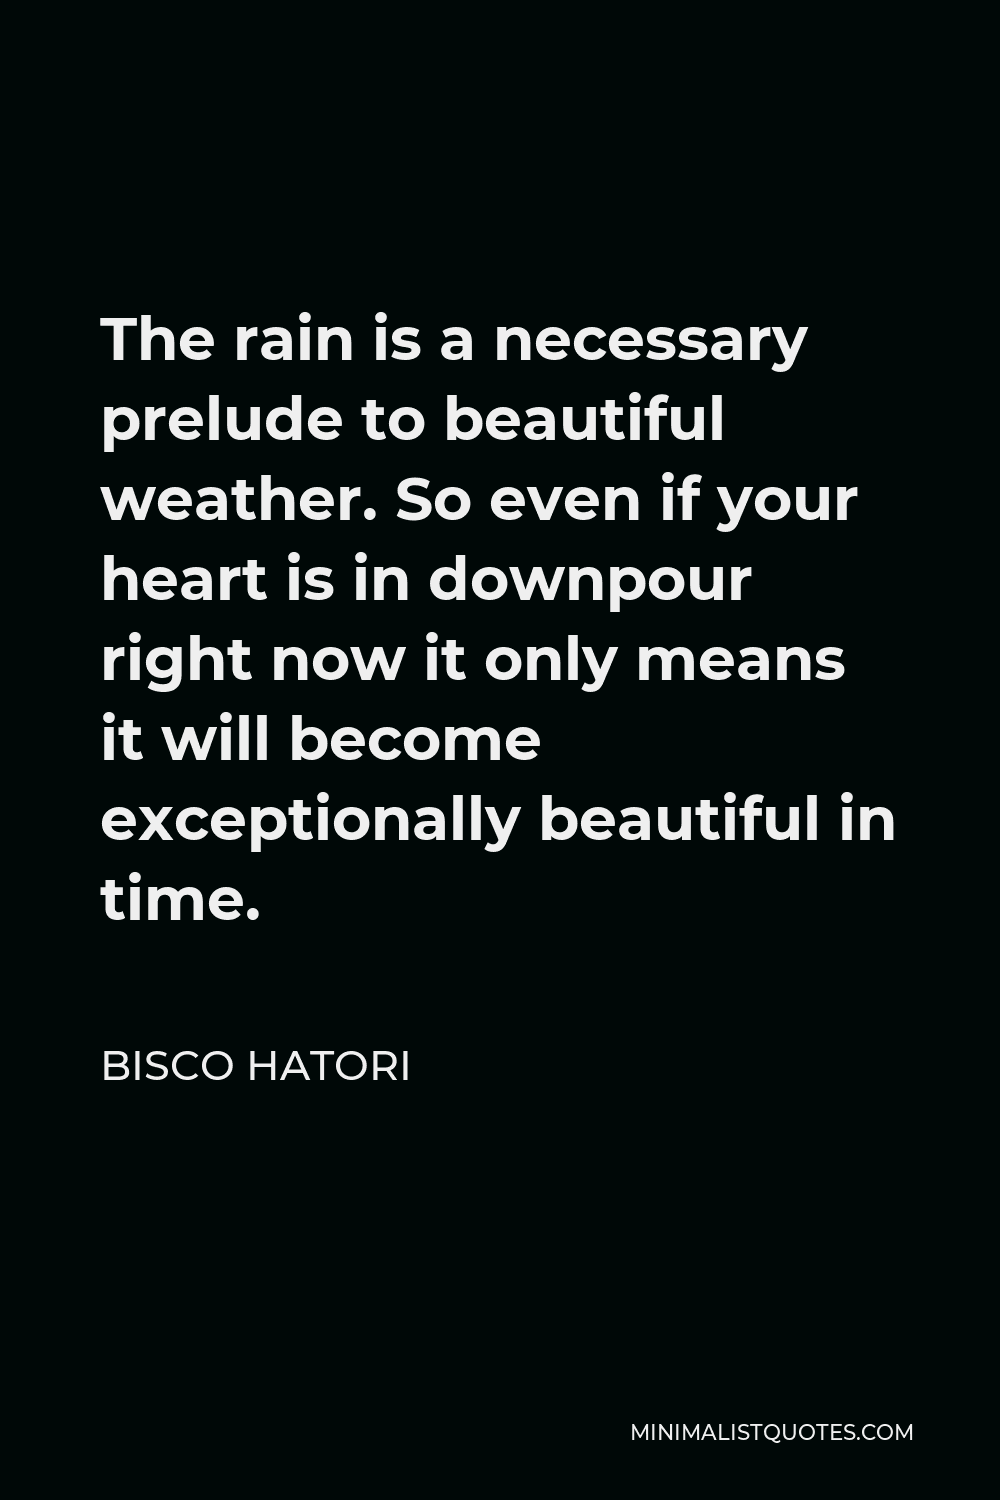 Bisco Hatori Quote - The rain is a necessary prelude to beautiful weather. So even if your heart is in downpour right now it only means it will become exceptionally beautiful in time.